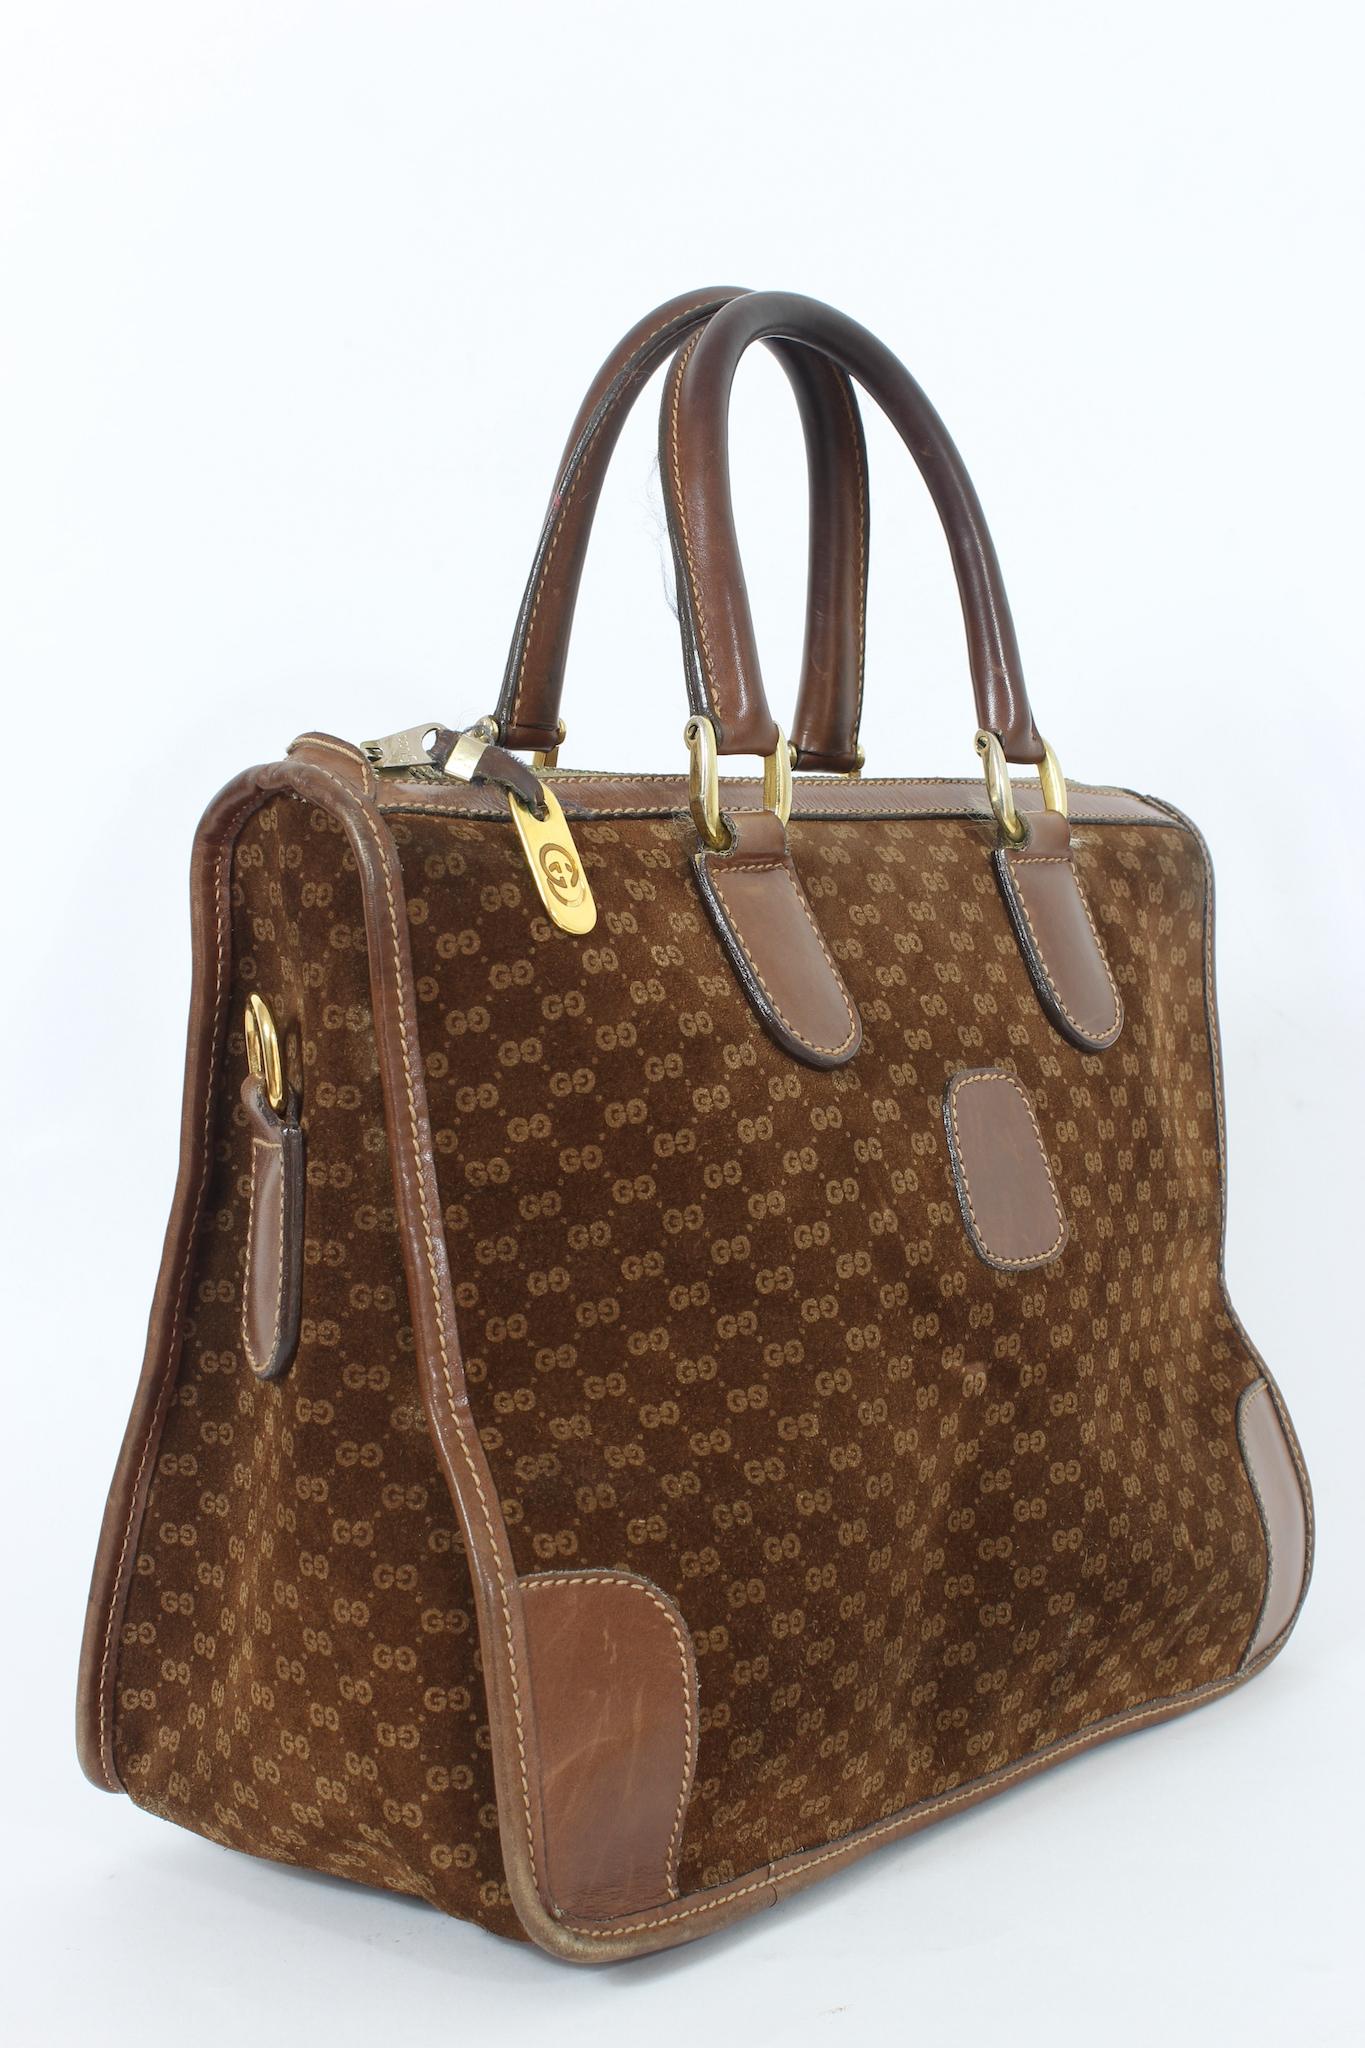 Gucci Brown Suede Leather Monogram Vintage Bag 70s In Excellent Condition For Sale In Brindisi, Bt